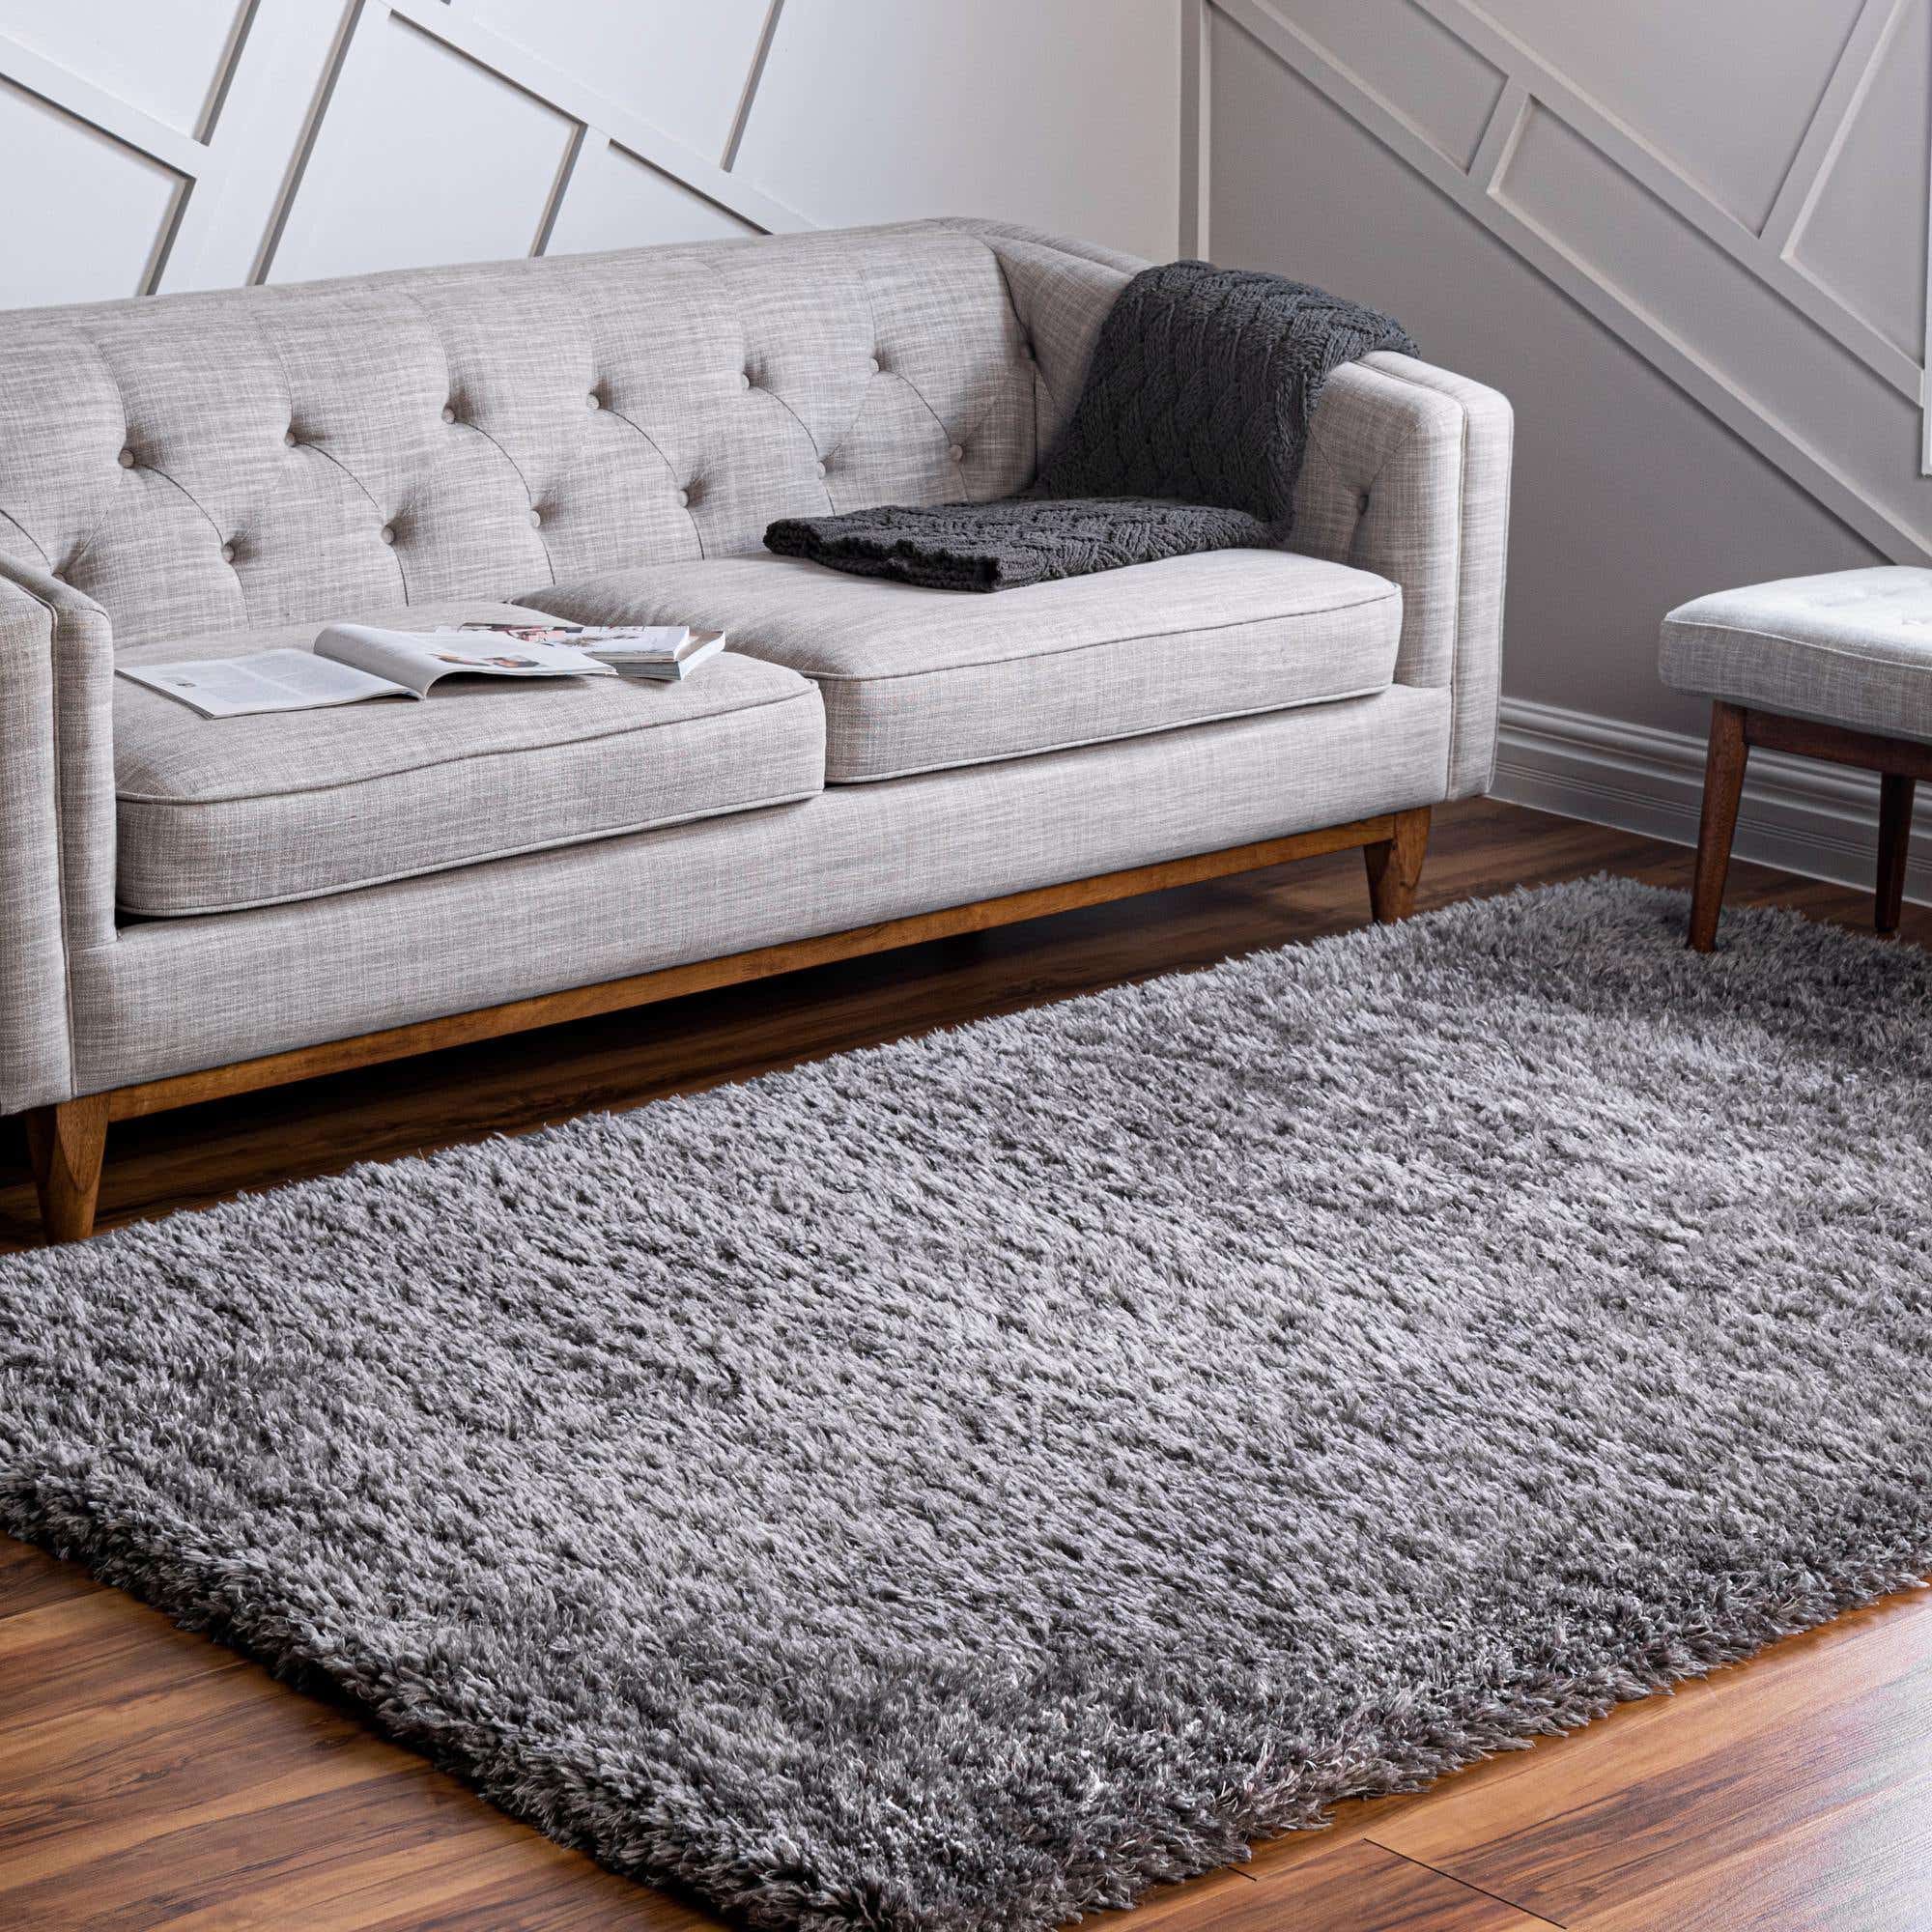 Infinity Collection Solid Shag Area Rugrugs ‚Äì Smoke 5' X 8'  High Pile Plush Shag Rug Perfect For Living Rooms, Bedrooms, Dining Rooms  And More – Walmart With Ash Infinity Shag Rugs (View 6 of 15)